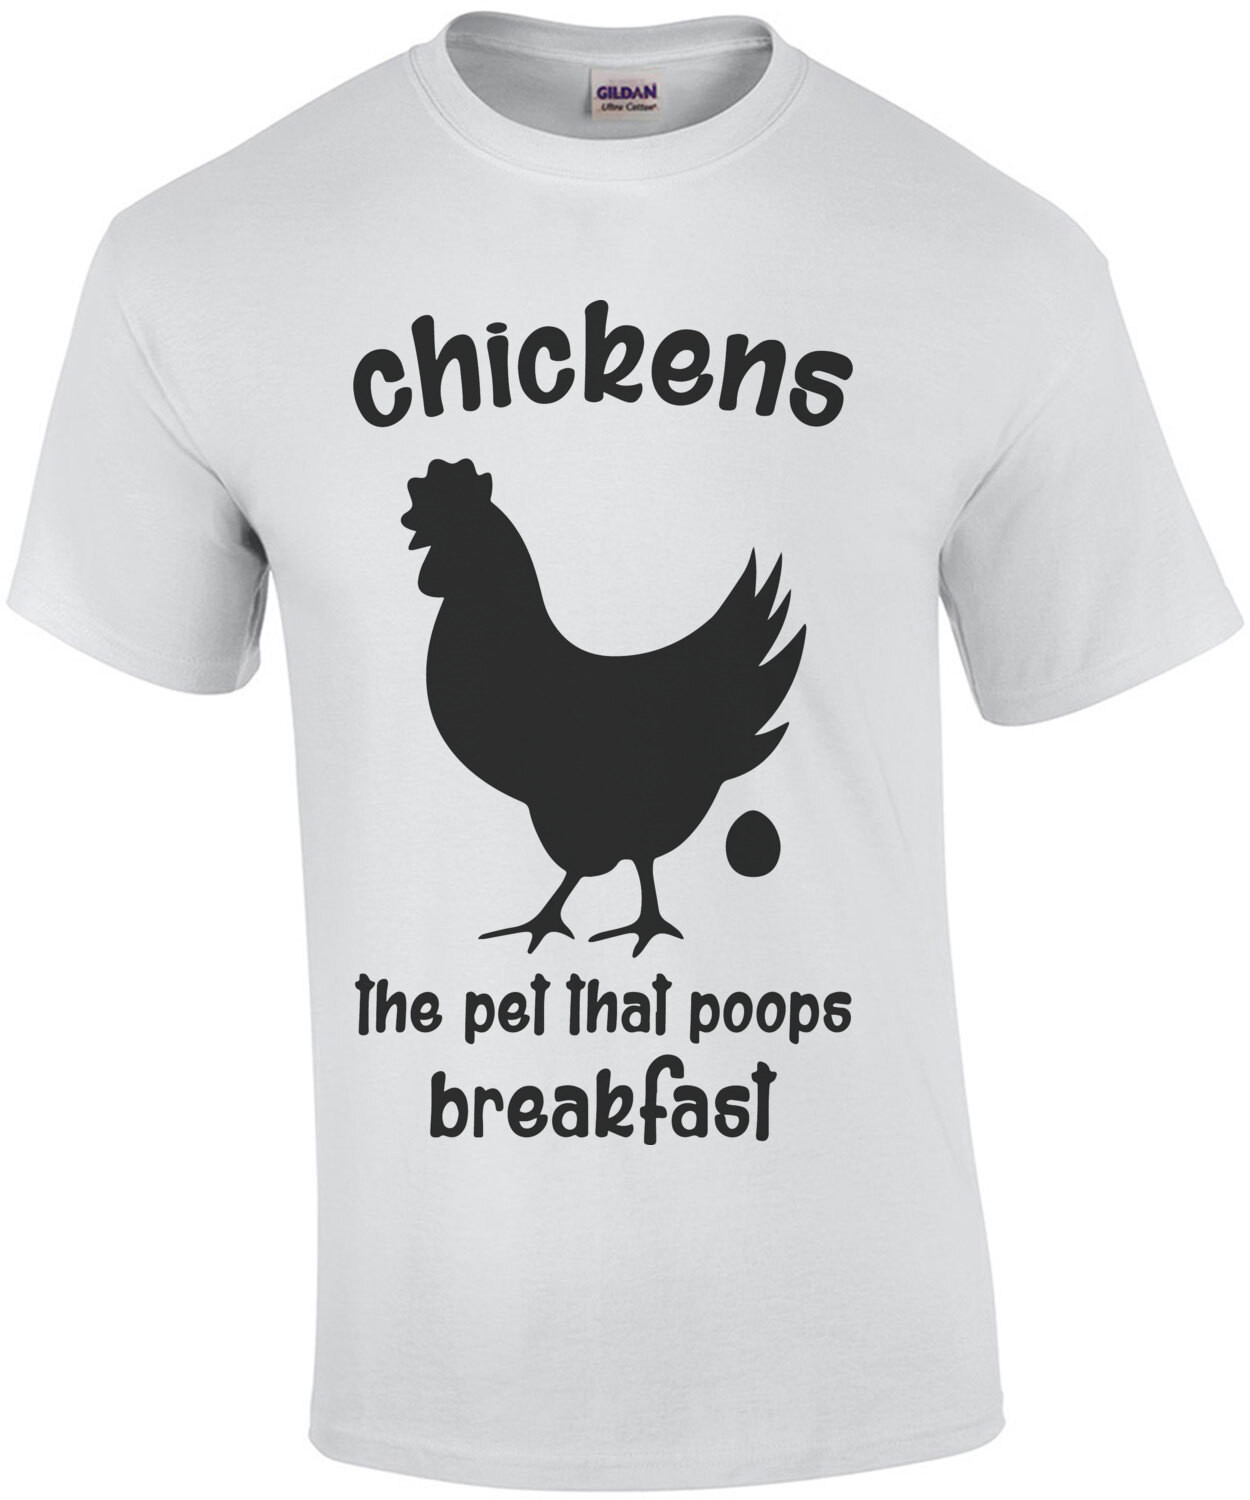 Chickens the pet that poops breakfast - funny t-shirt